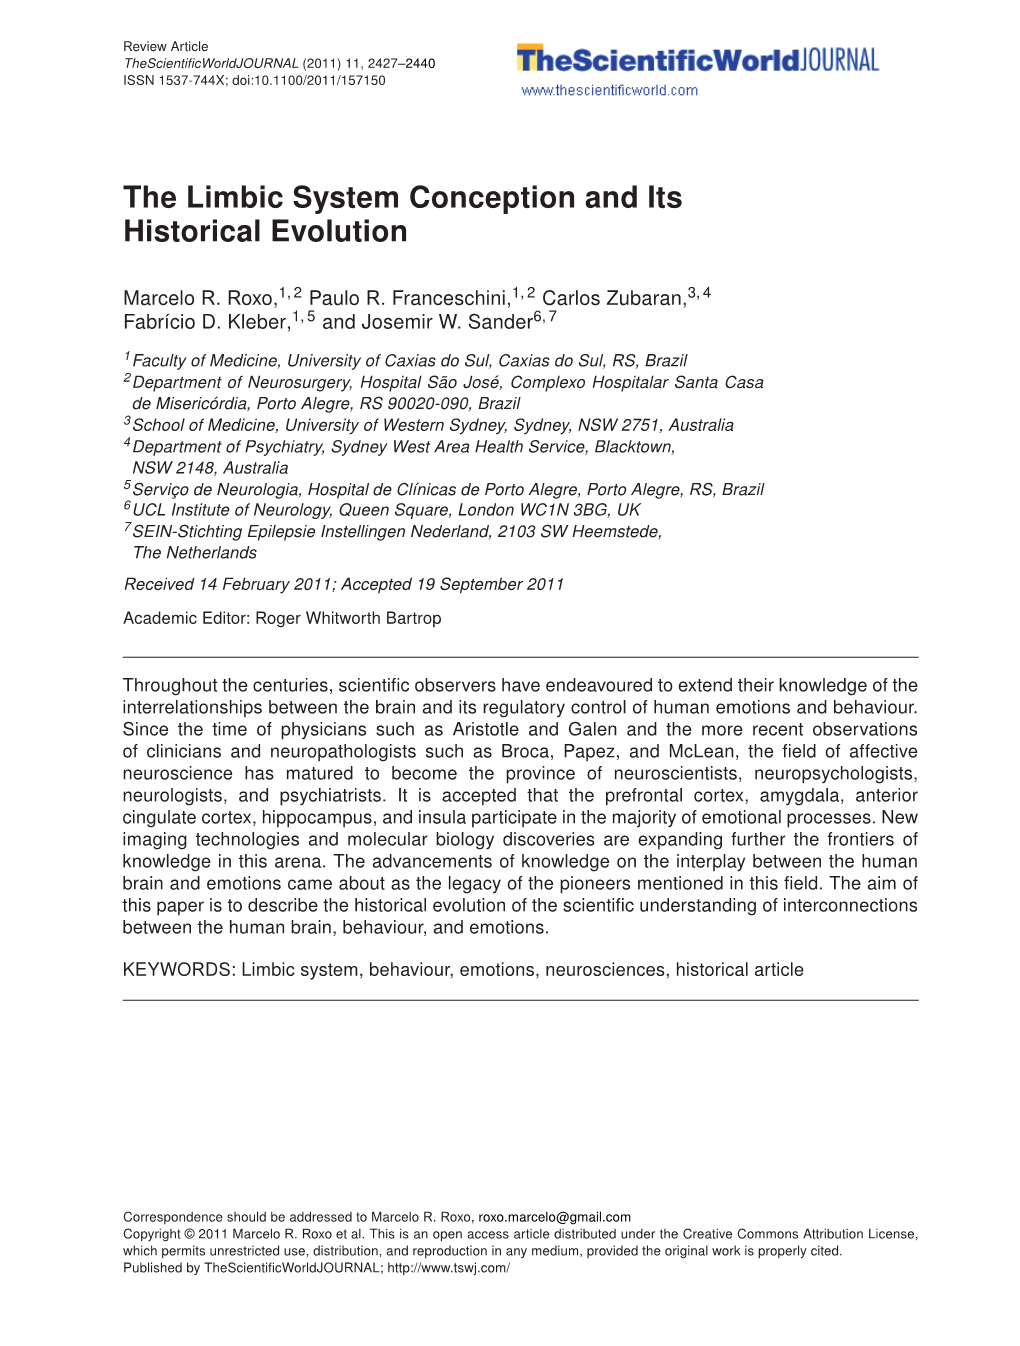 The Limbic System Conception and Its Historical Evolution